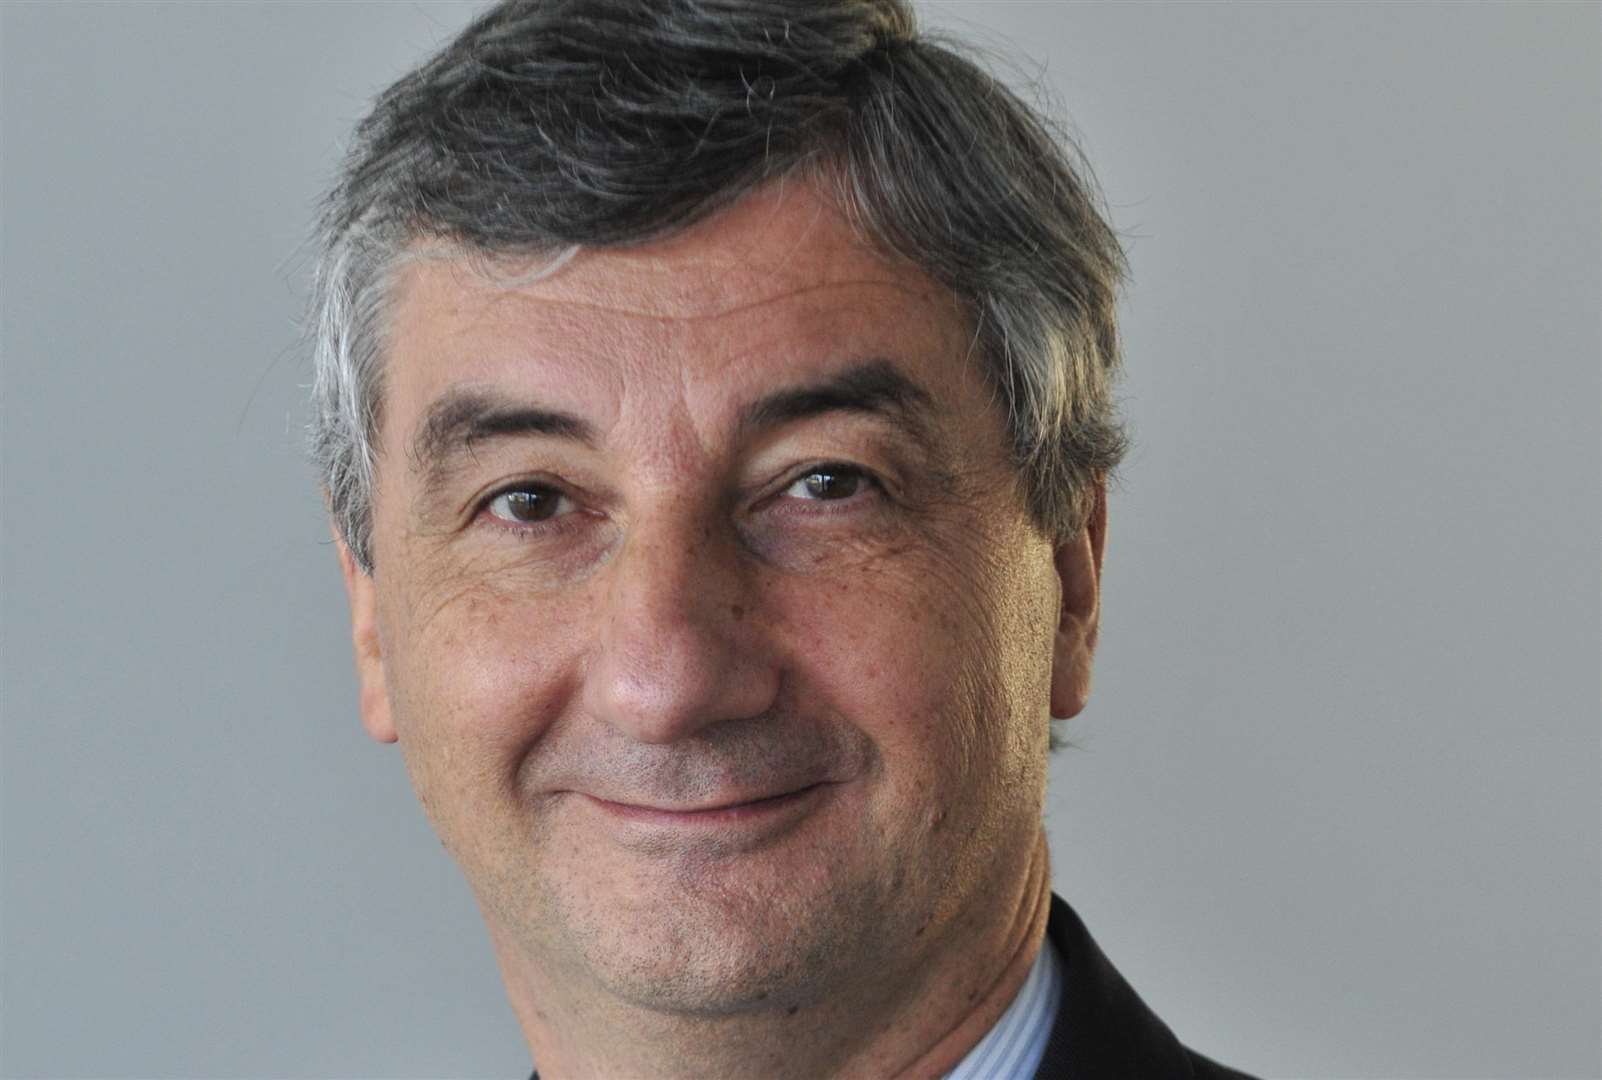 Jacques Gounon, chairman and chief executive of Eurotunnel parent company Getlink